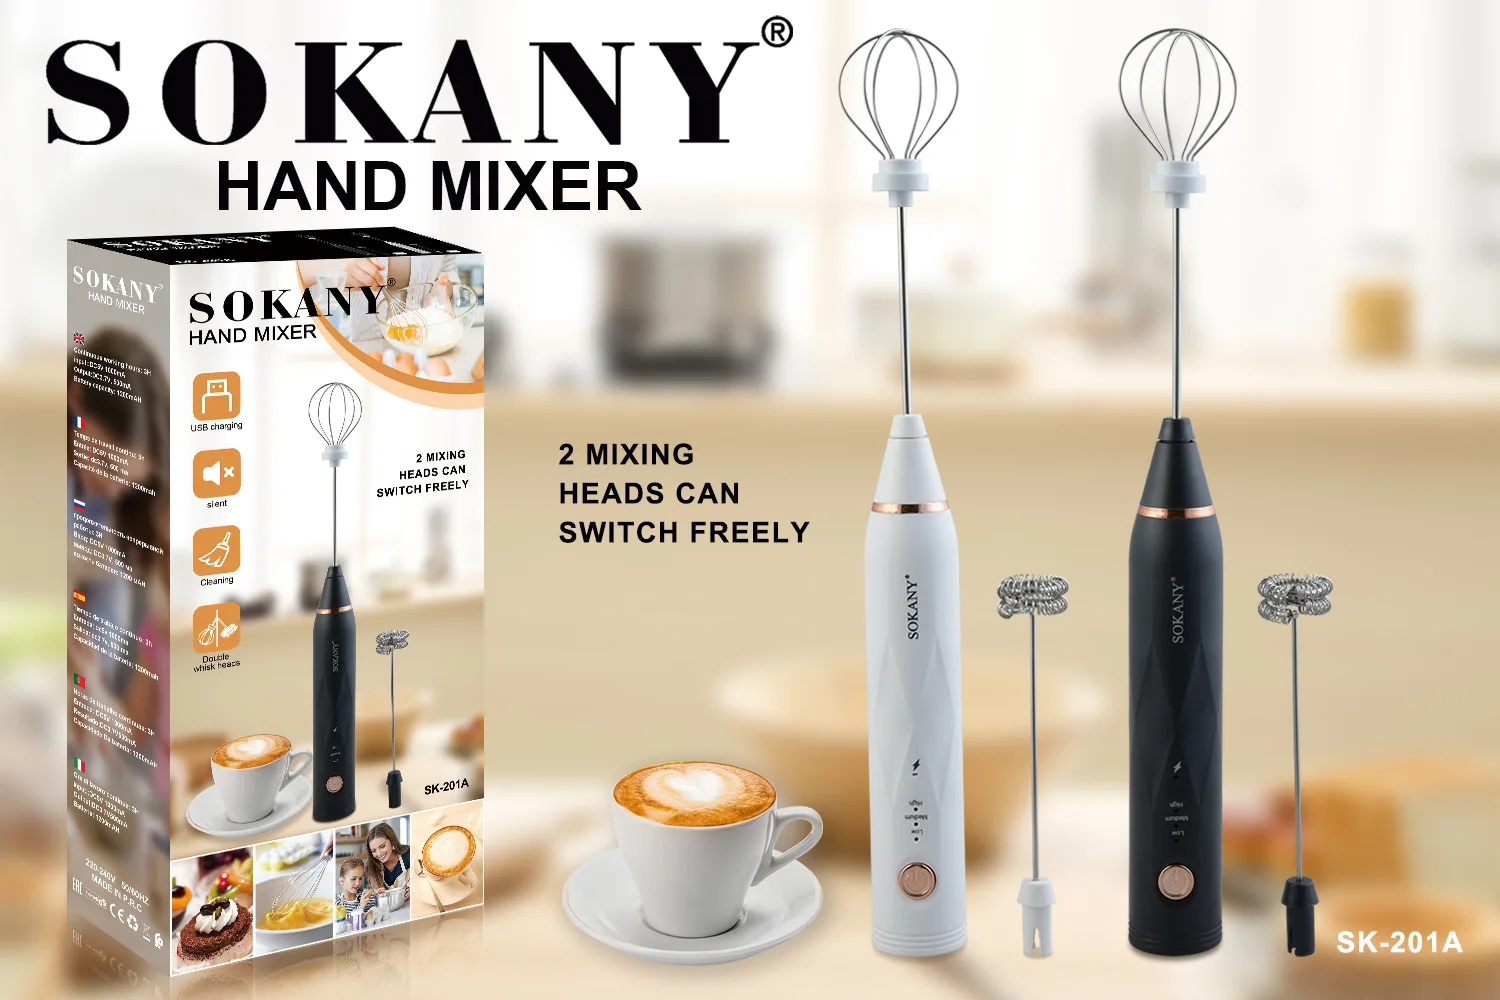 https://ae01.alicdn.com/kf/S960e7f1d180c4f39ba5719f43c3809c2Q/Handheld-Milk-Frother-Coffee-Whisk-Foam-Mixer-with-USB-Rechargeable-3-Speeds-for-Latte-Cappuccino-Hot.jpg